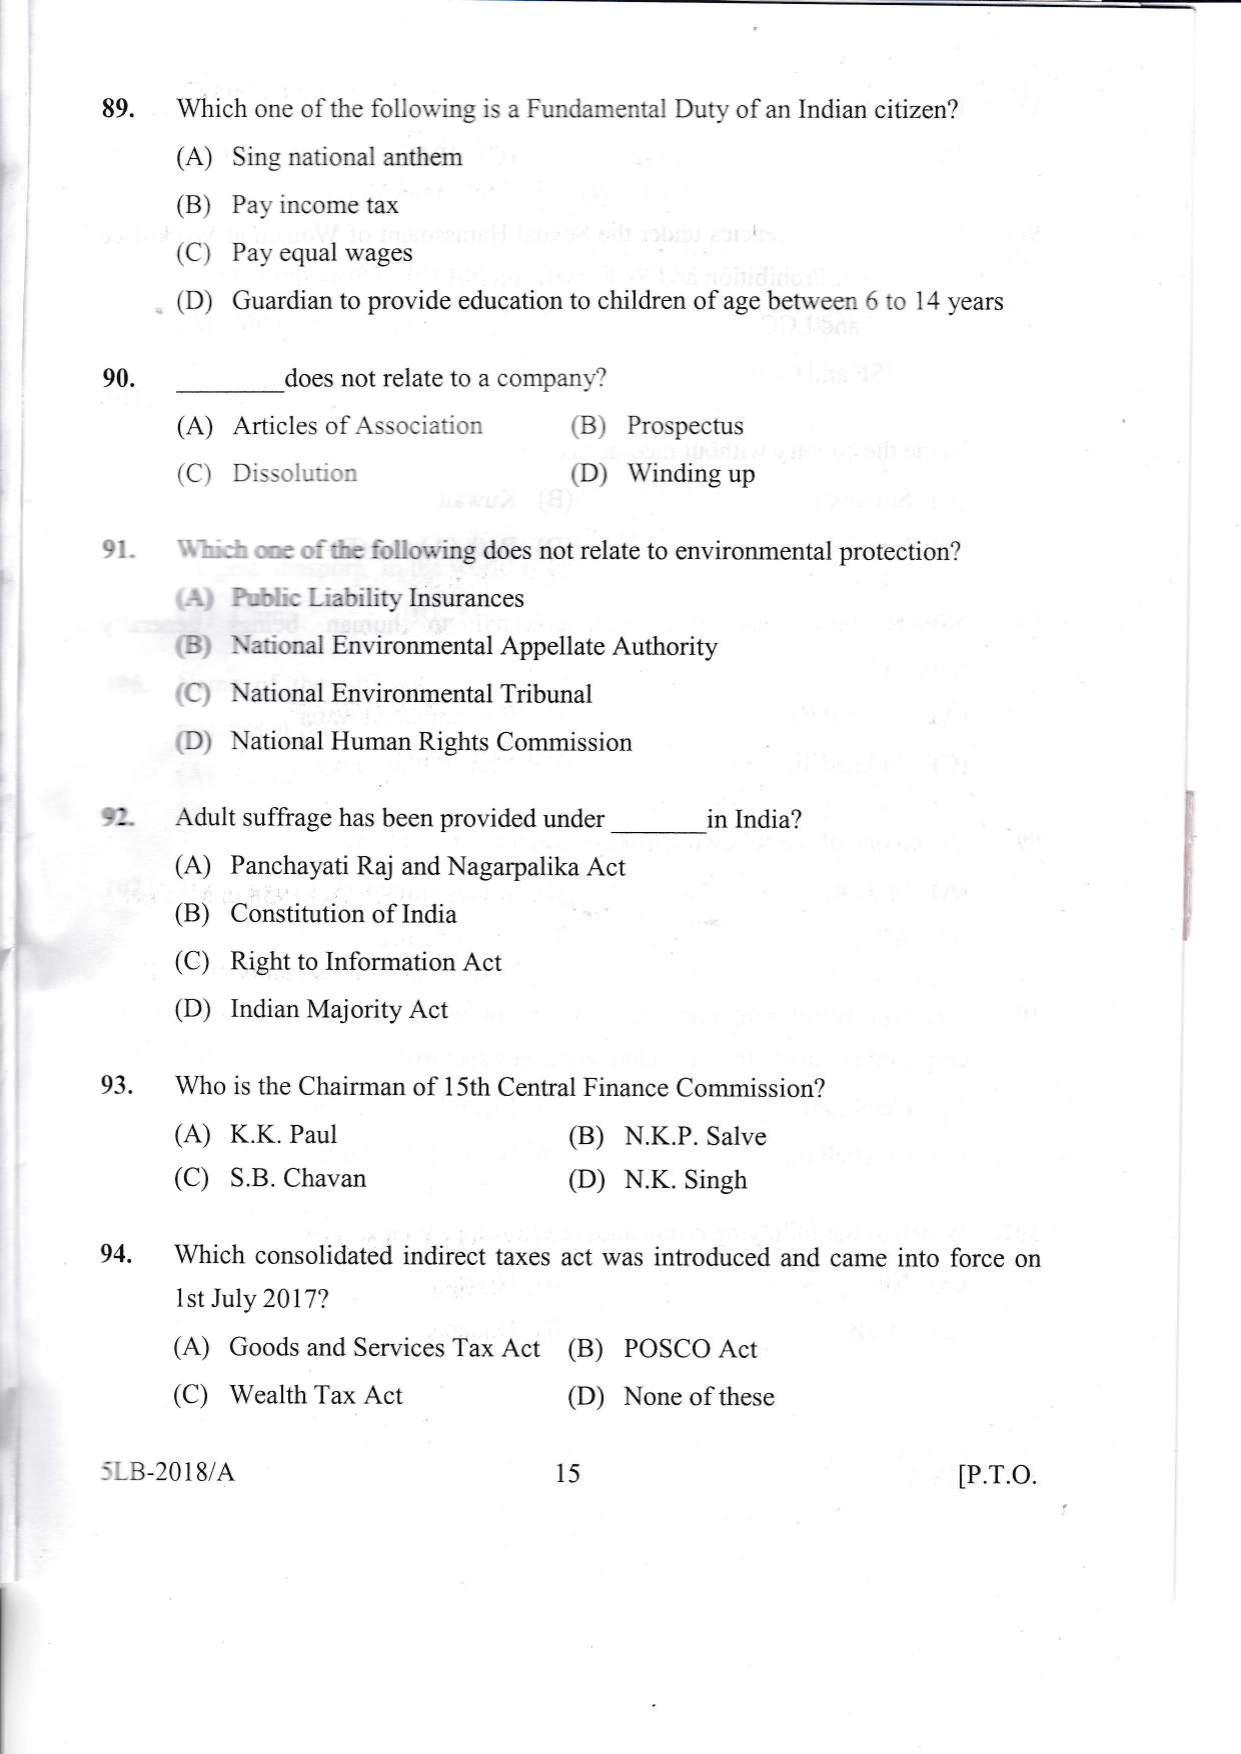 KLEE 5 Year LLB Exam 2018 Question Paper - Page 15